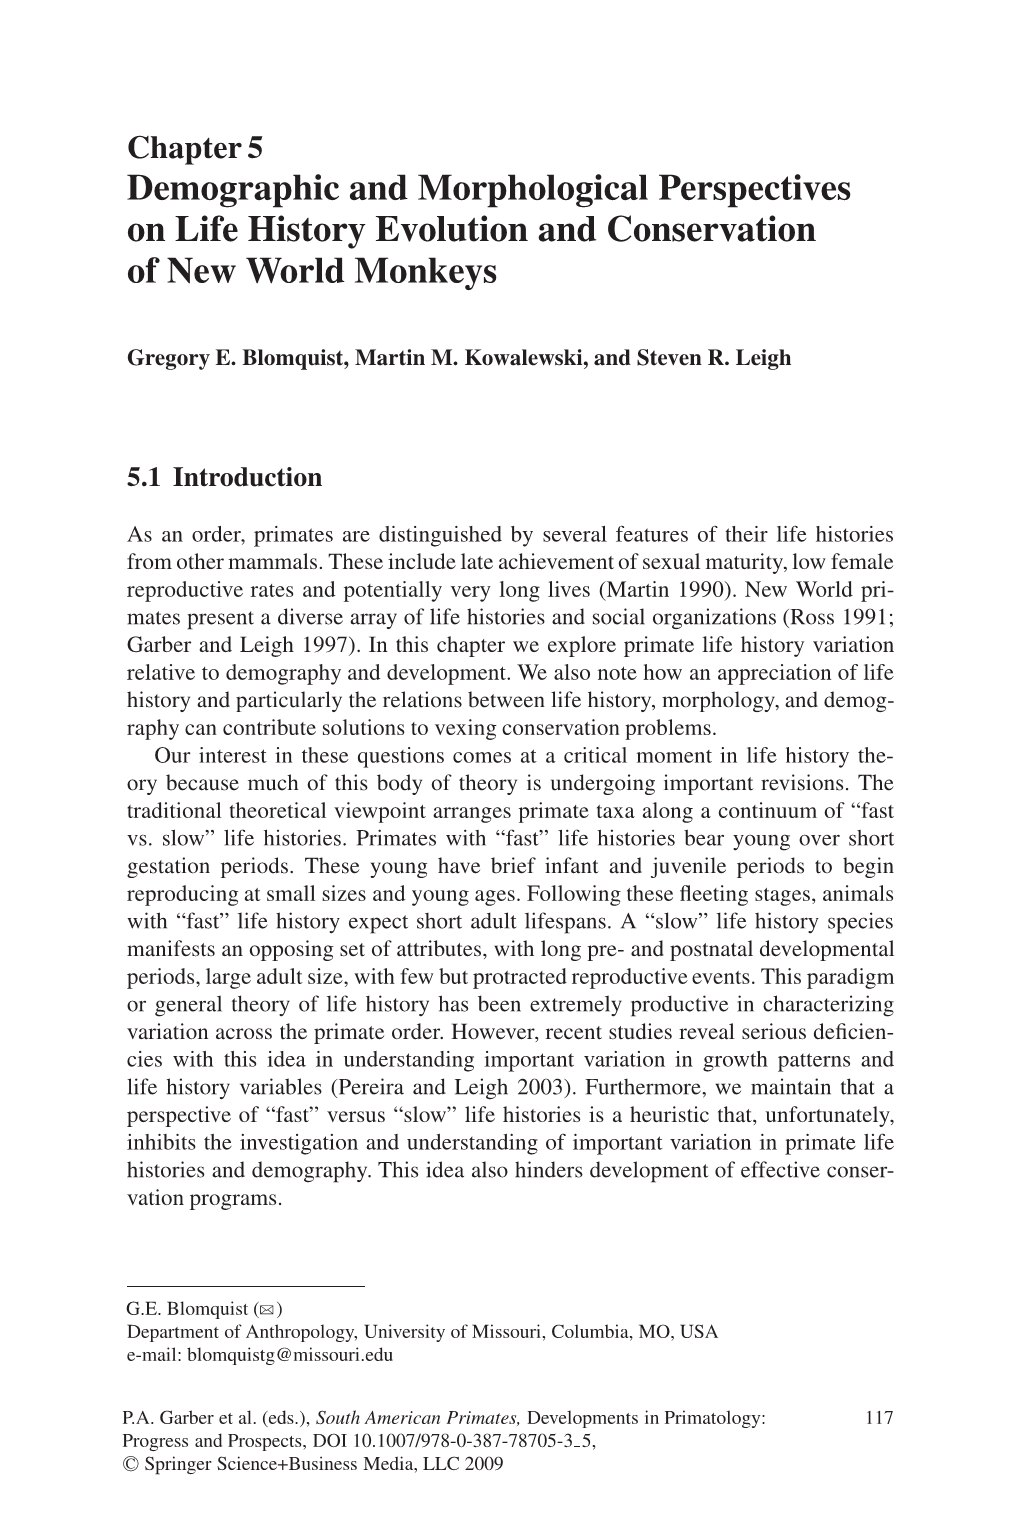 Demographic and Morphological Perspectives on Life History Evolution and Conservation of New World Monkeys